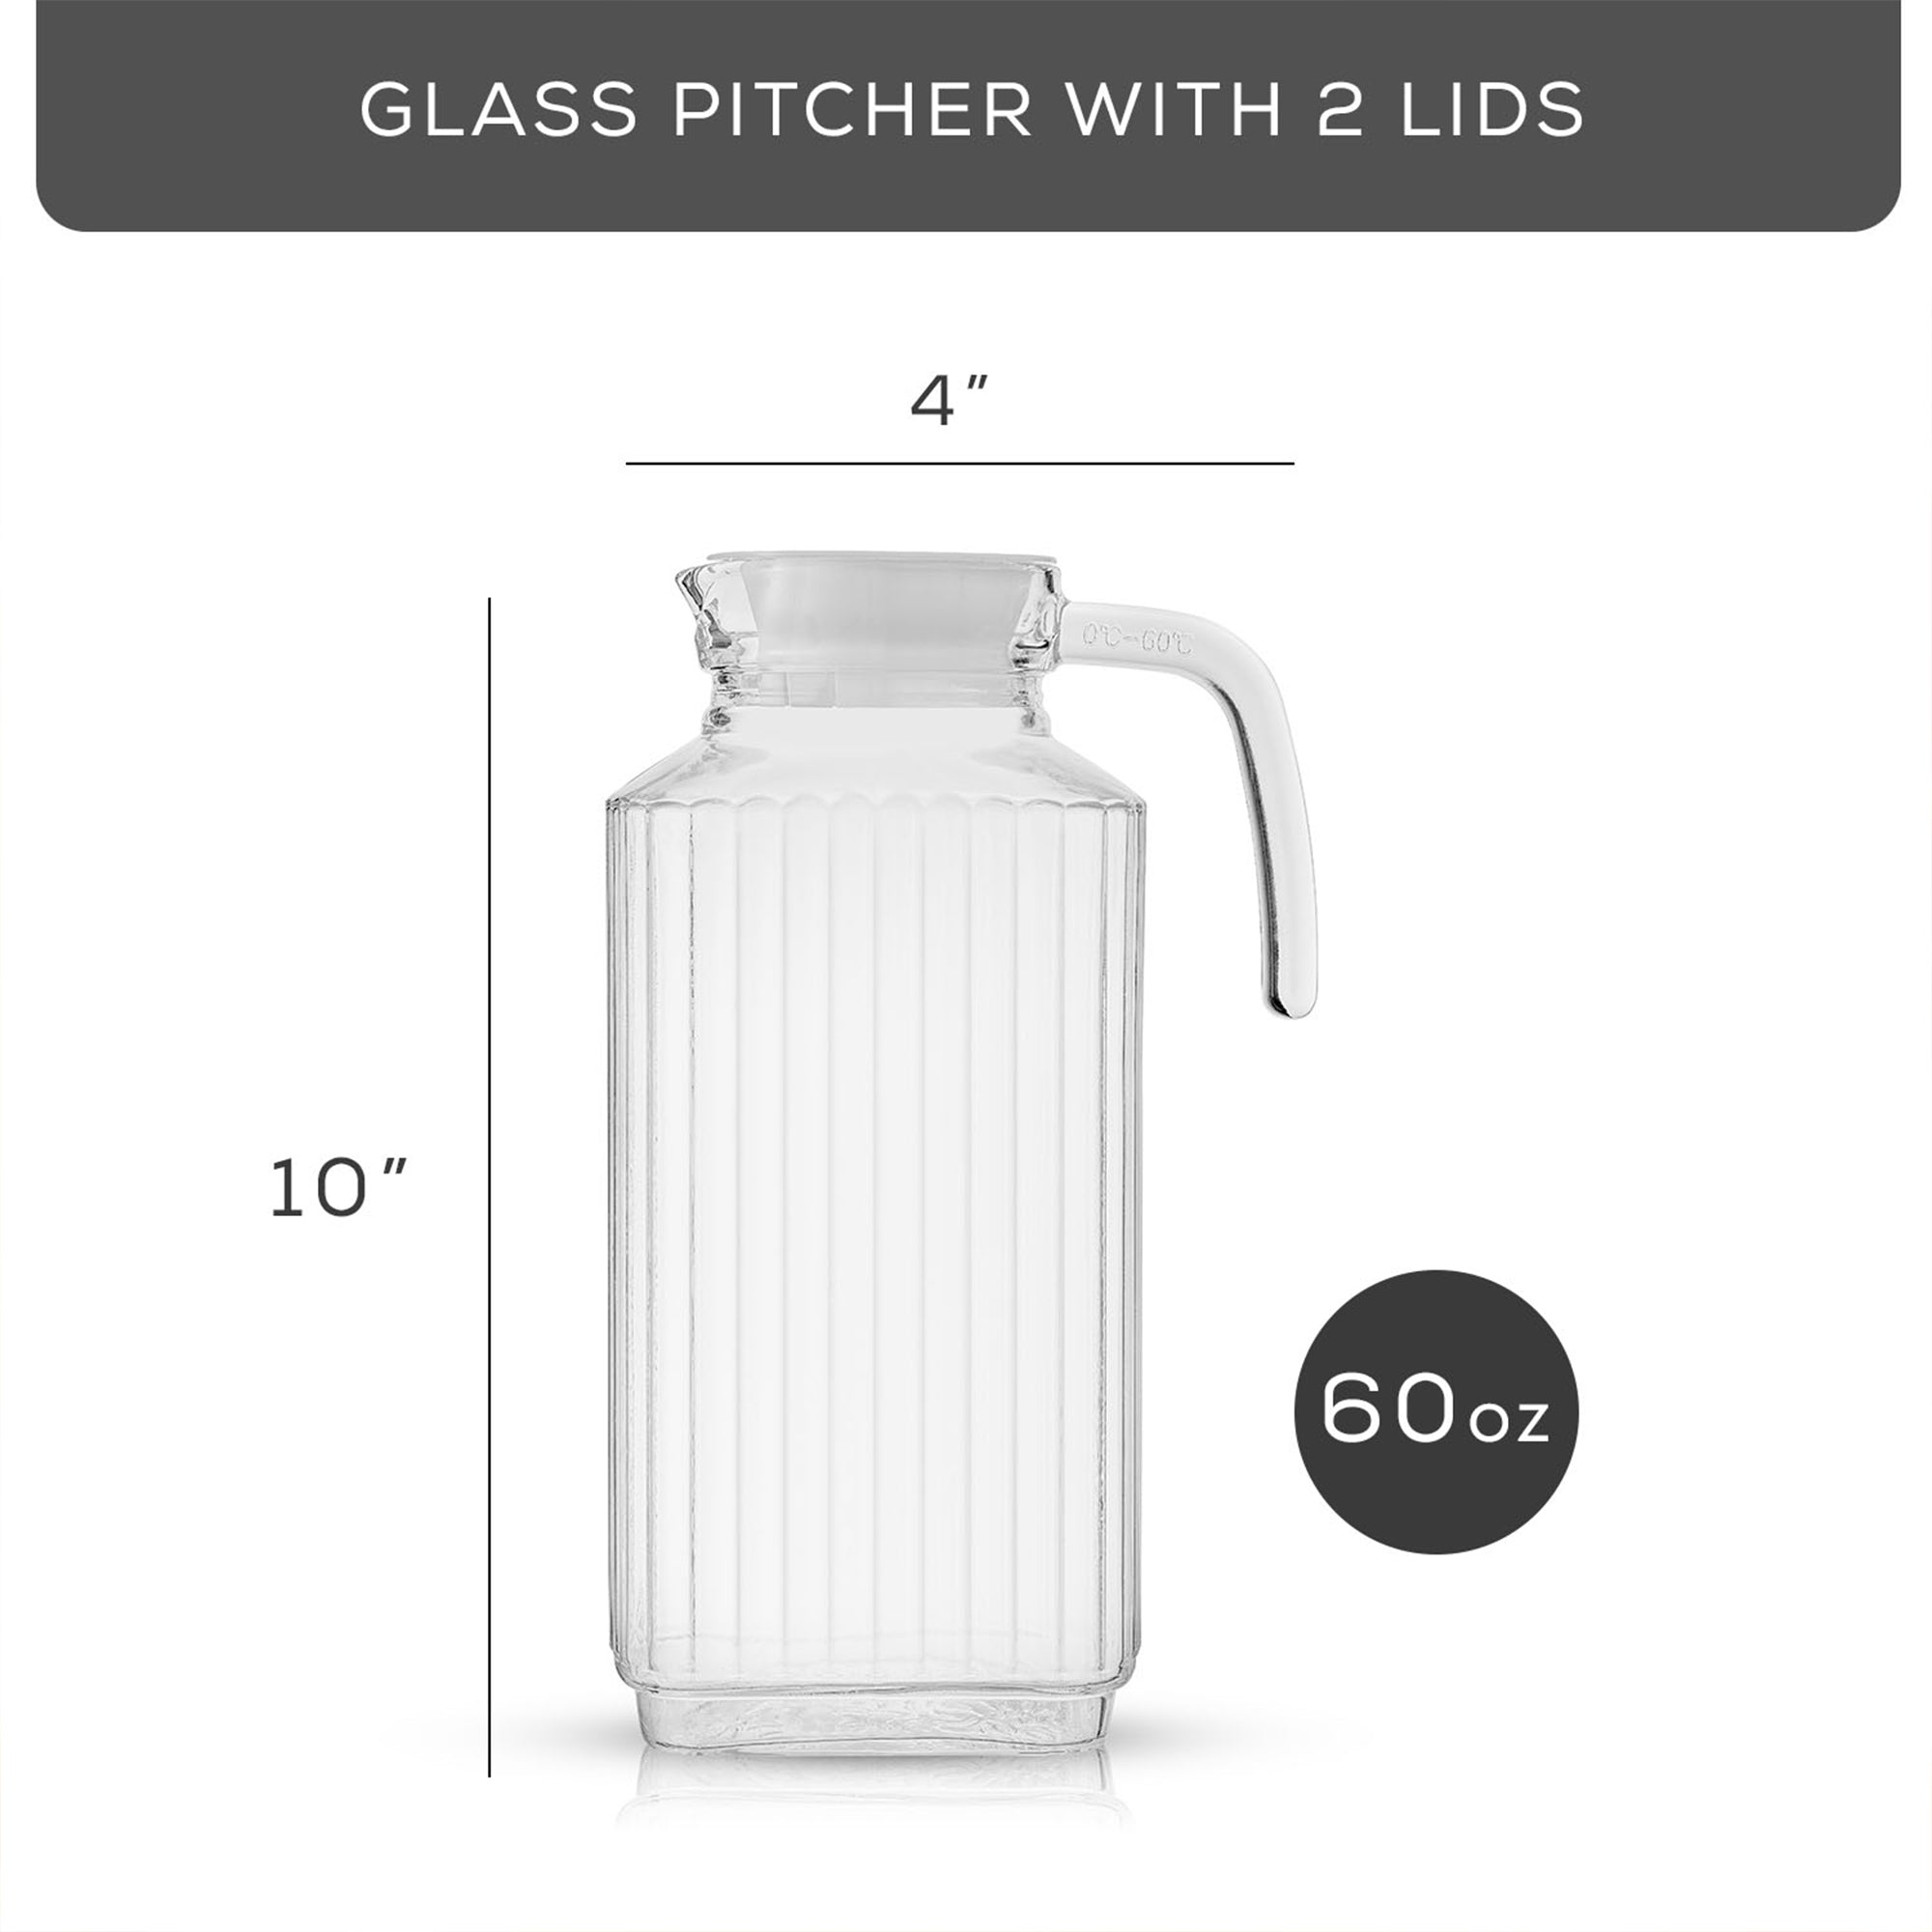 A 60-ounce JoyJolt Beverage Serveware Glass Pitcher with measurements marked on the side. The pitcher has a clear glass body and a handle for easy pouring. Text overlaid on the image reads “GLASS PITCHER WITH 2 LIDS 4”W x 10”H 60 oz.”